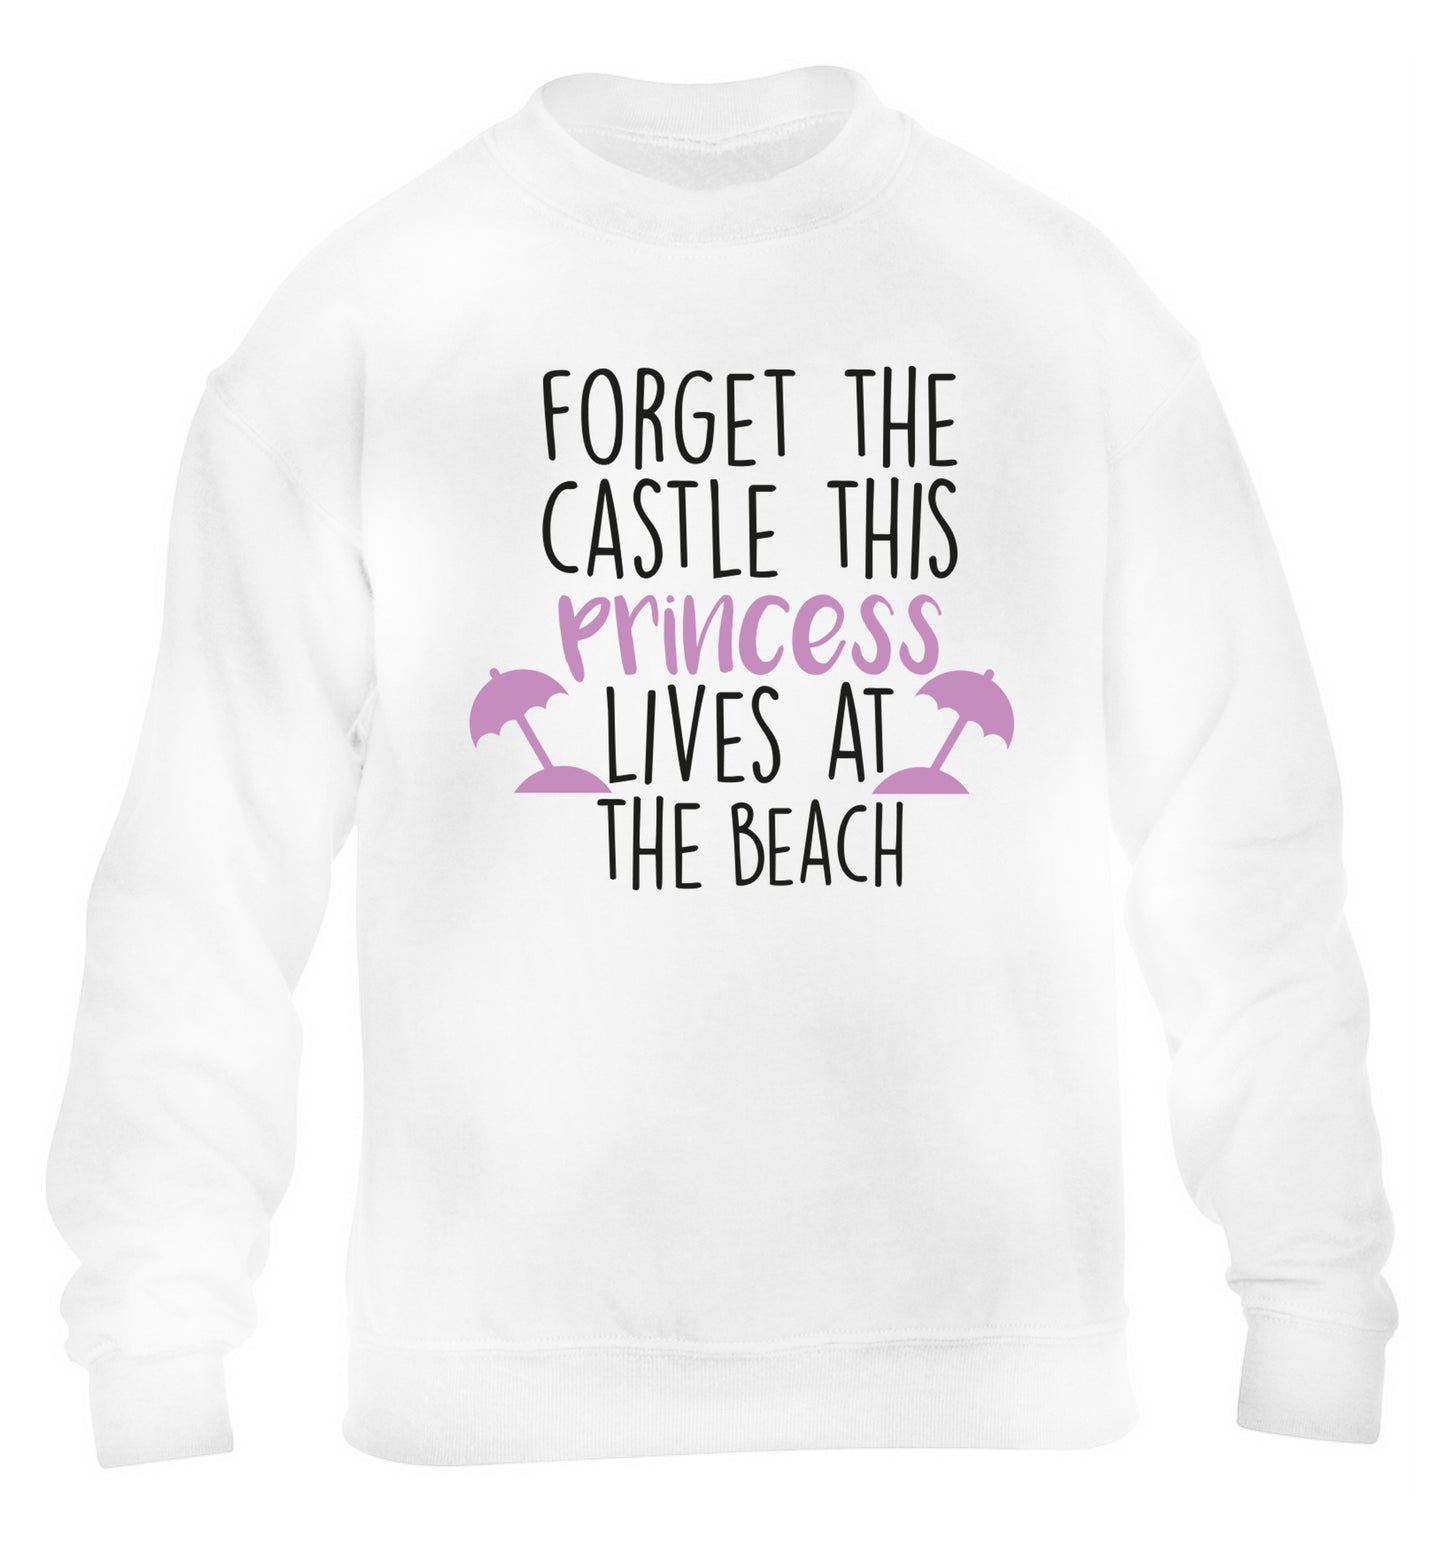 Forget the castle this princess lives at the beach children's white sweater 12-14 Years